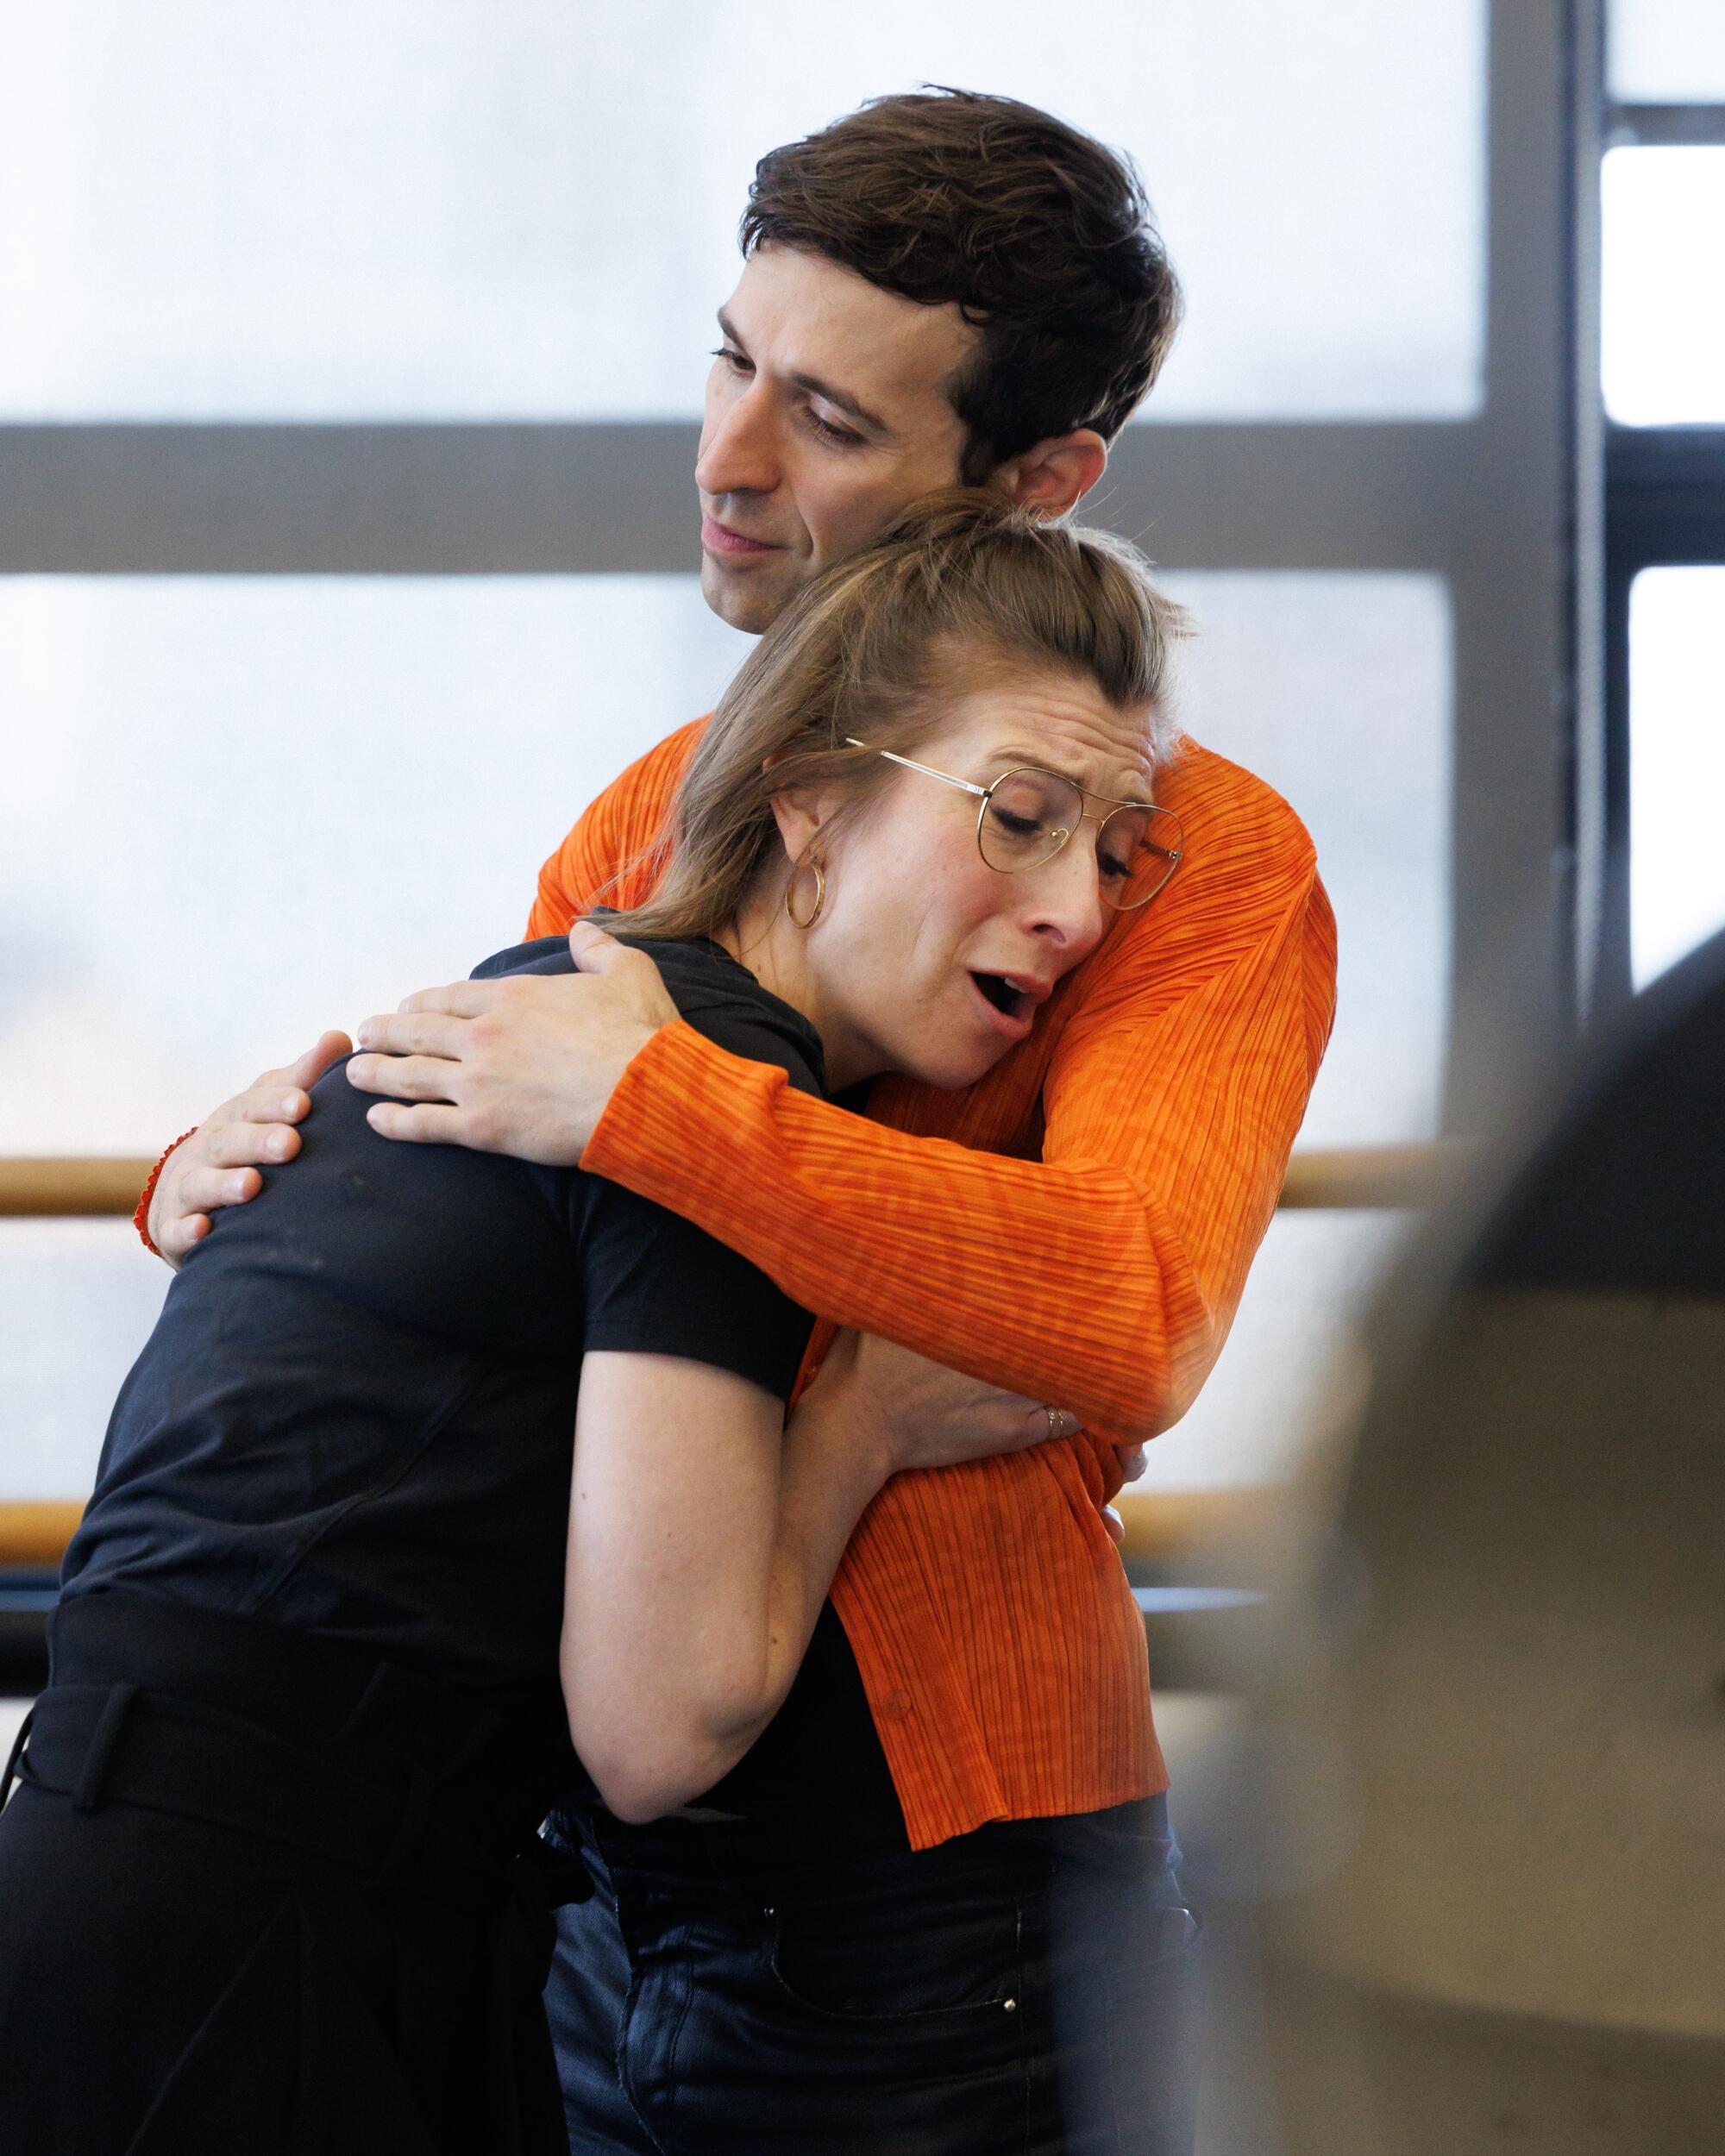 Kiera Duffy and Anthony Roth Costanzo, in an orange jacket, hug while rehearsing a scene for "The Comet / Poppea."